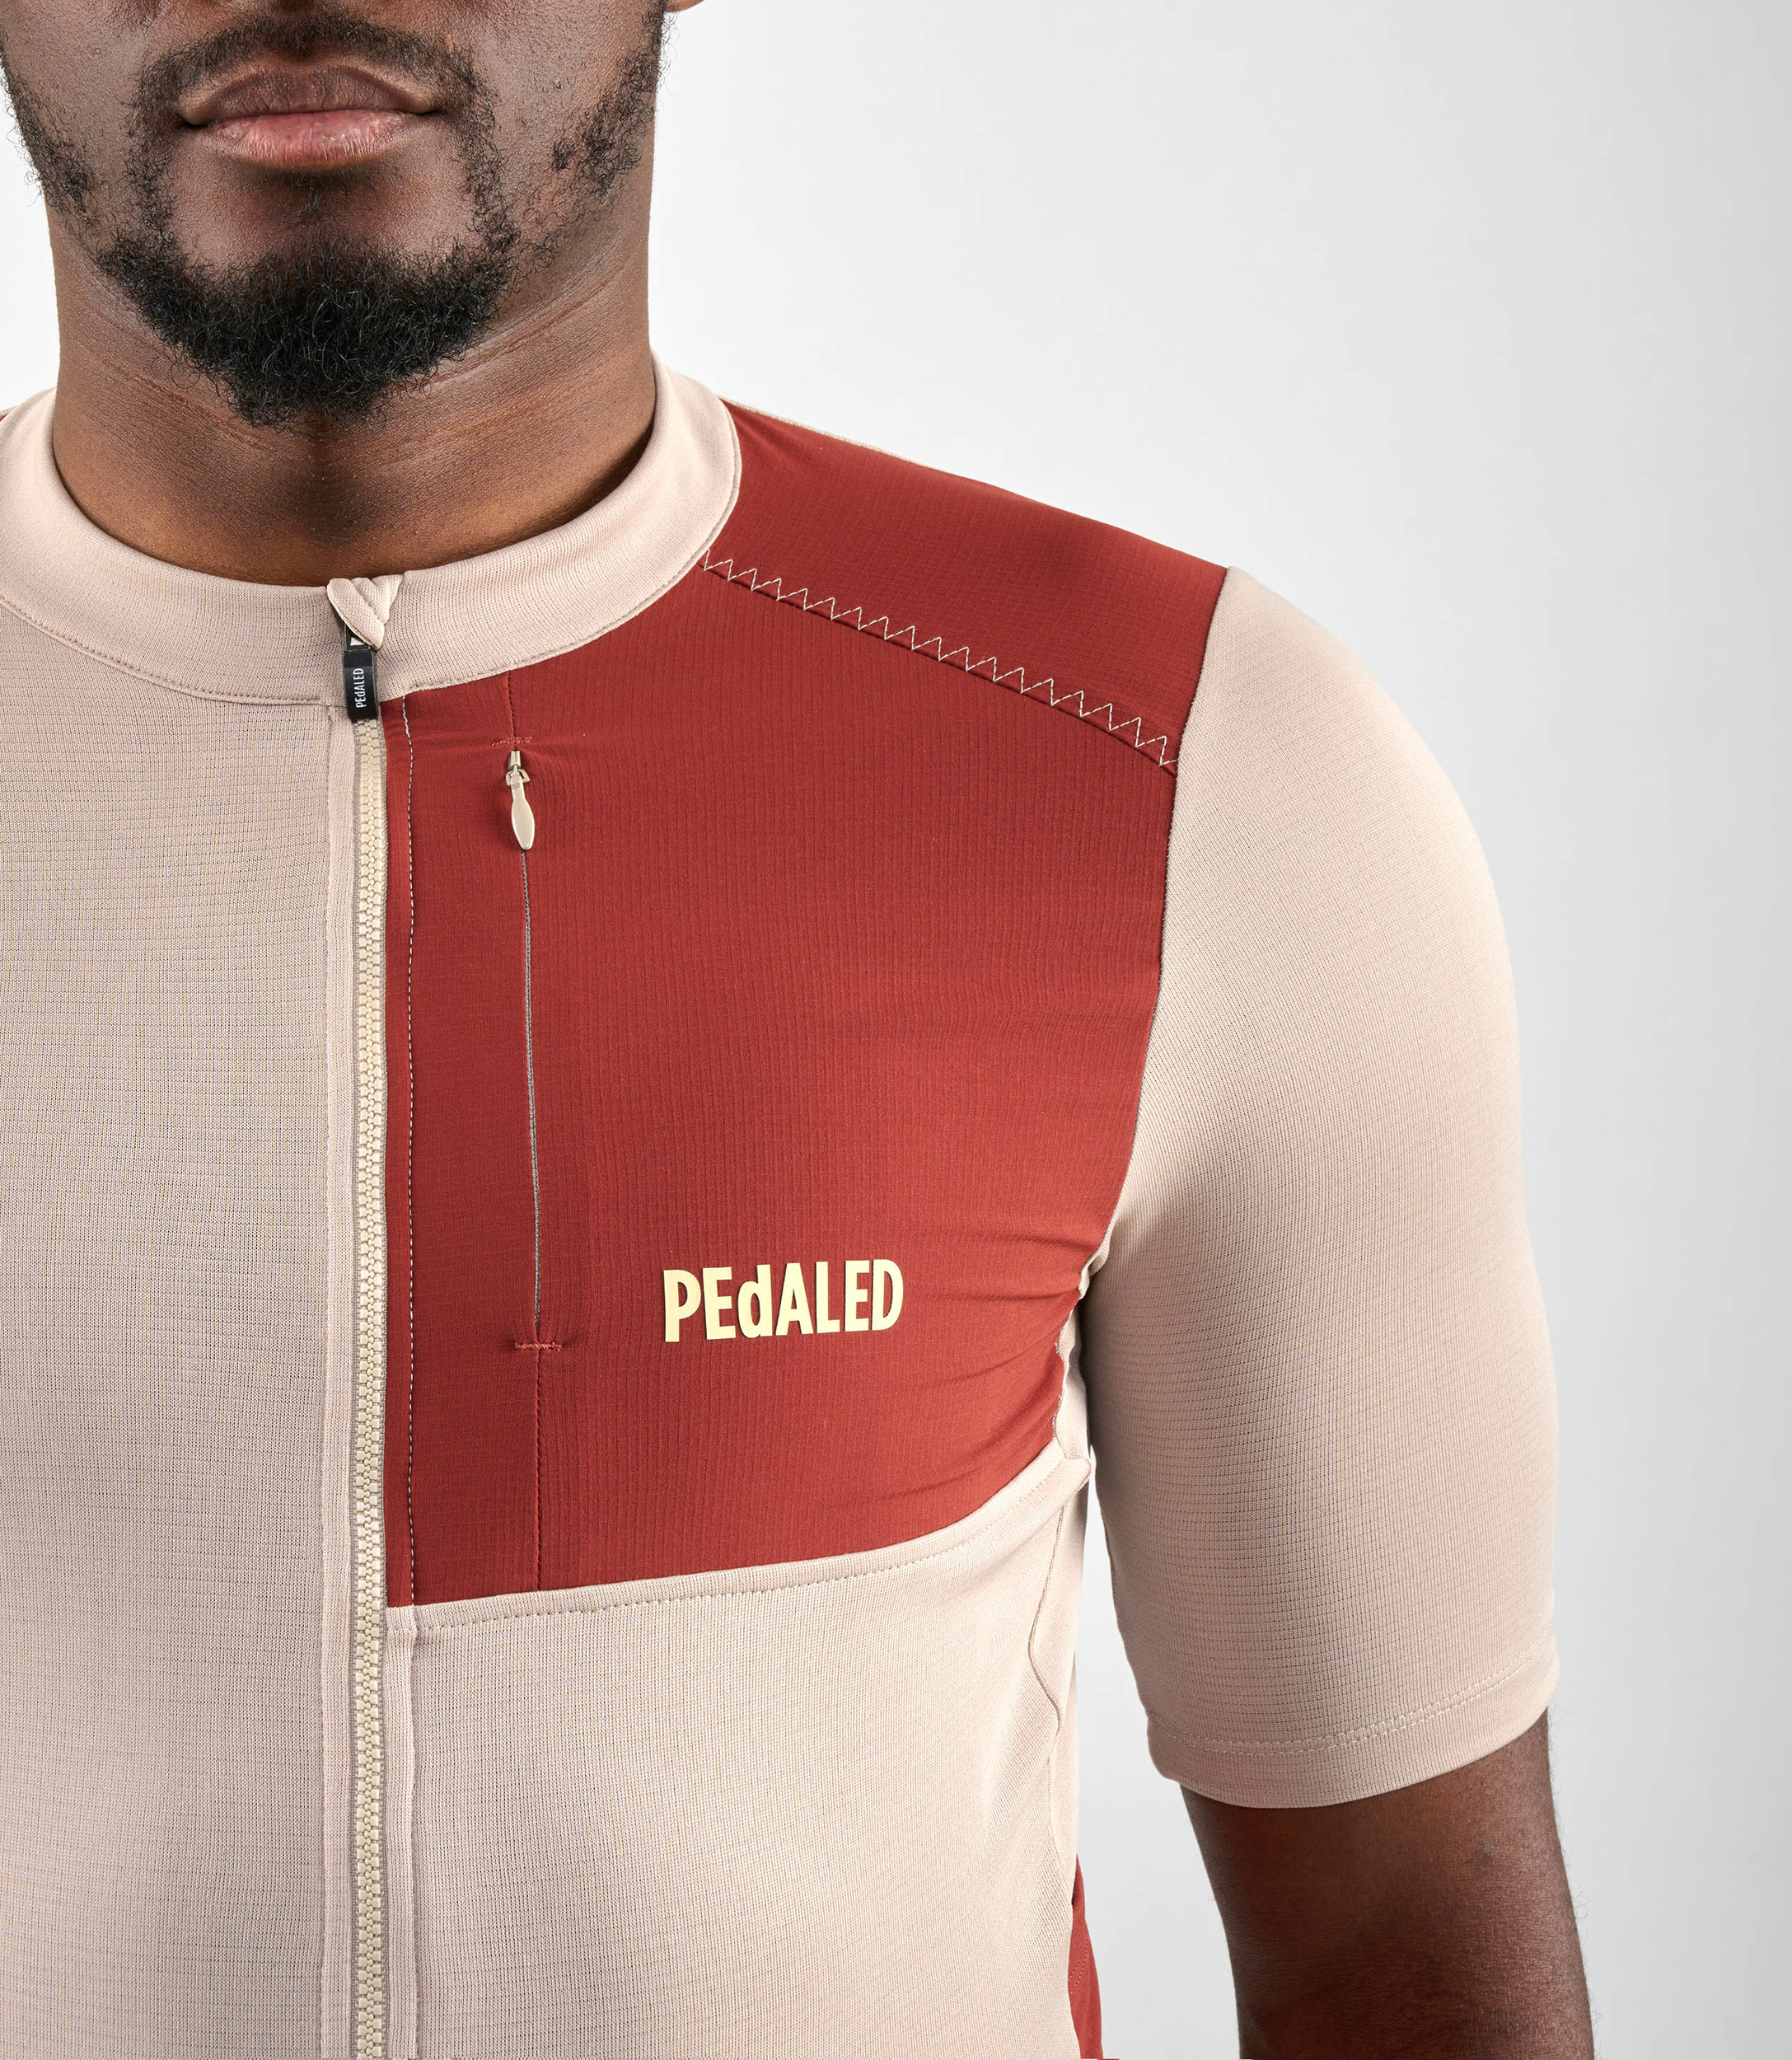 cycling-cargo-jersey-men-beige-odyssey-front-pocket-pedaled